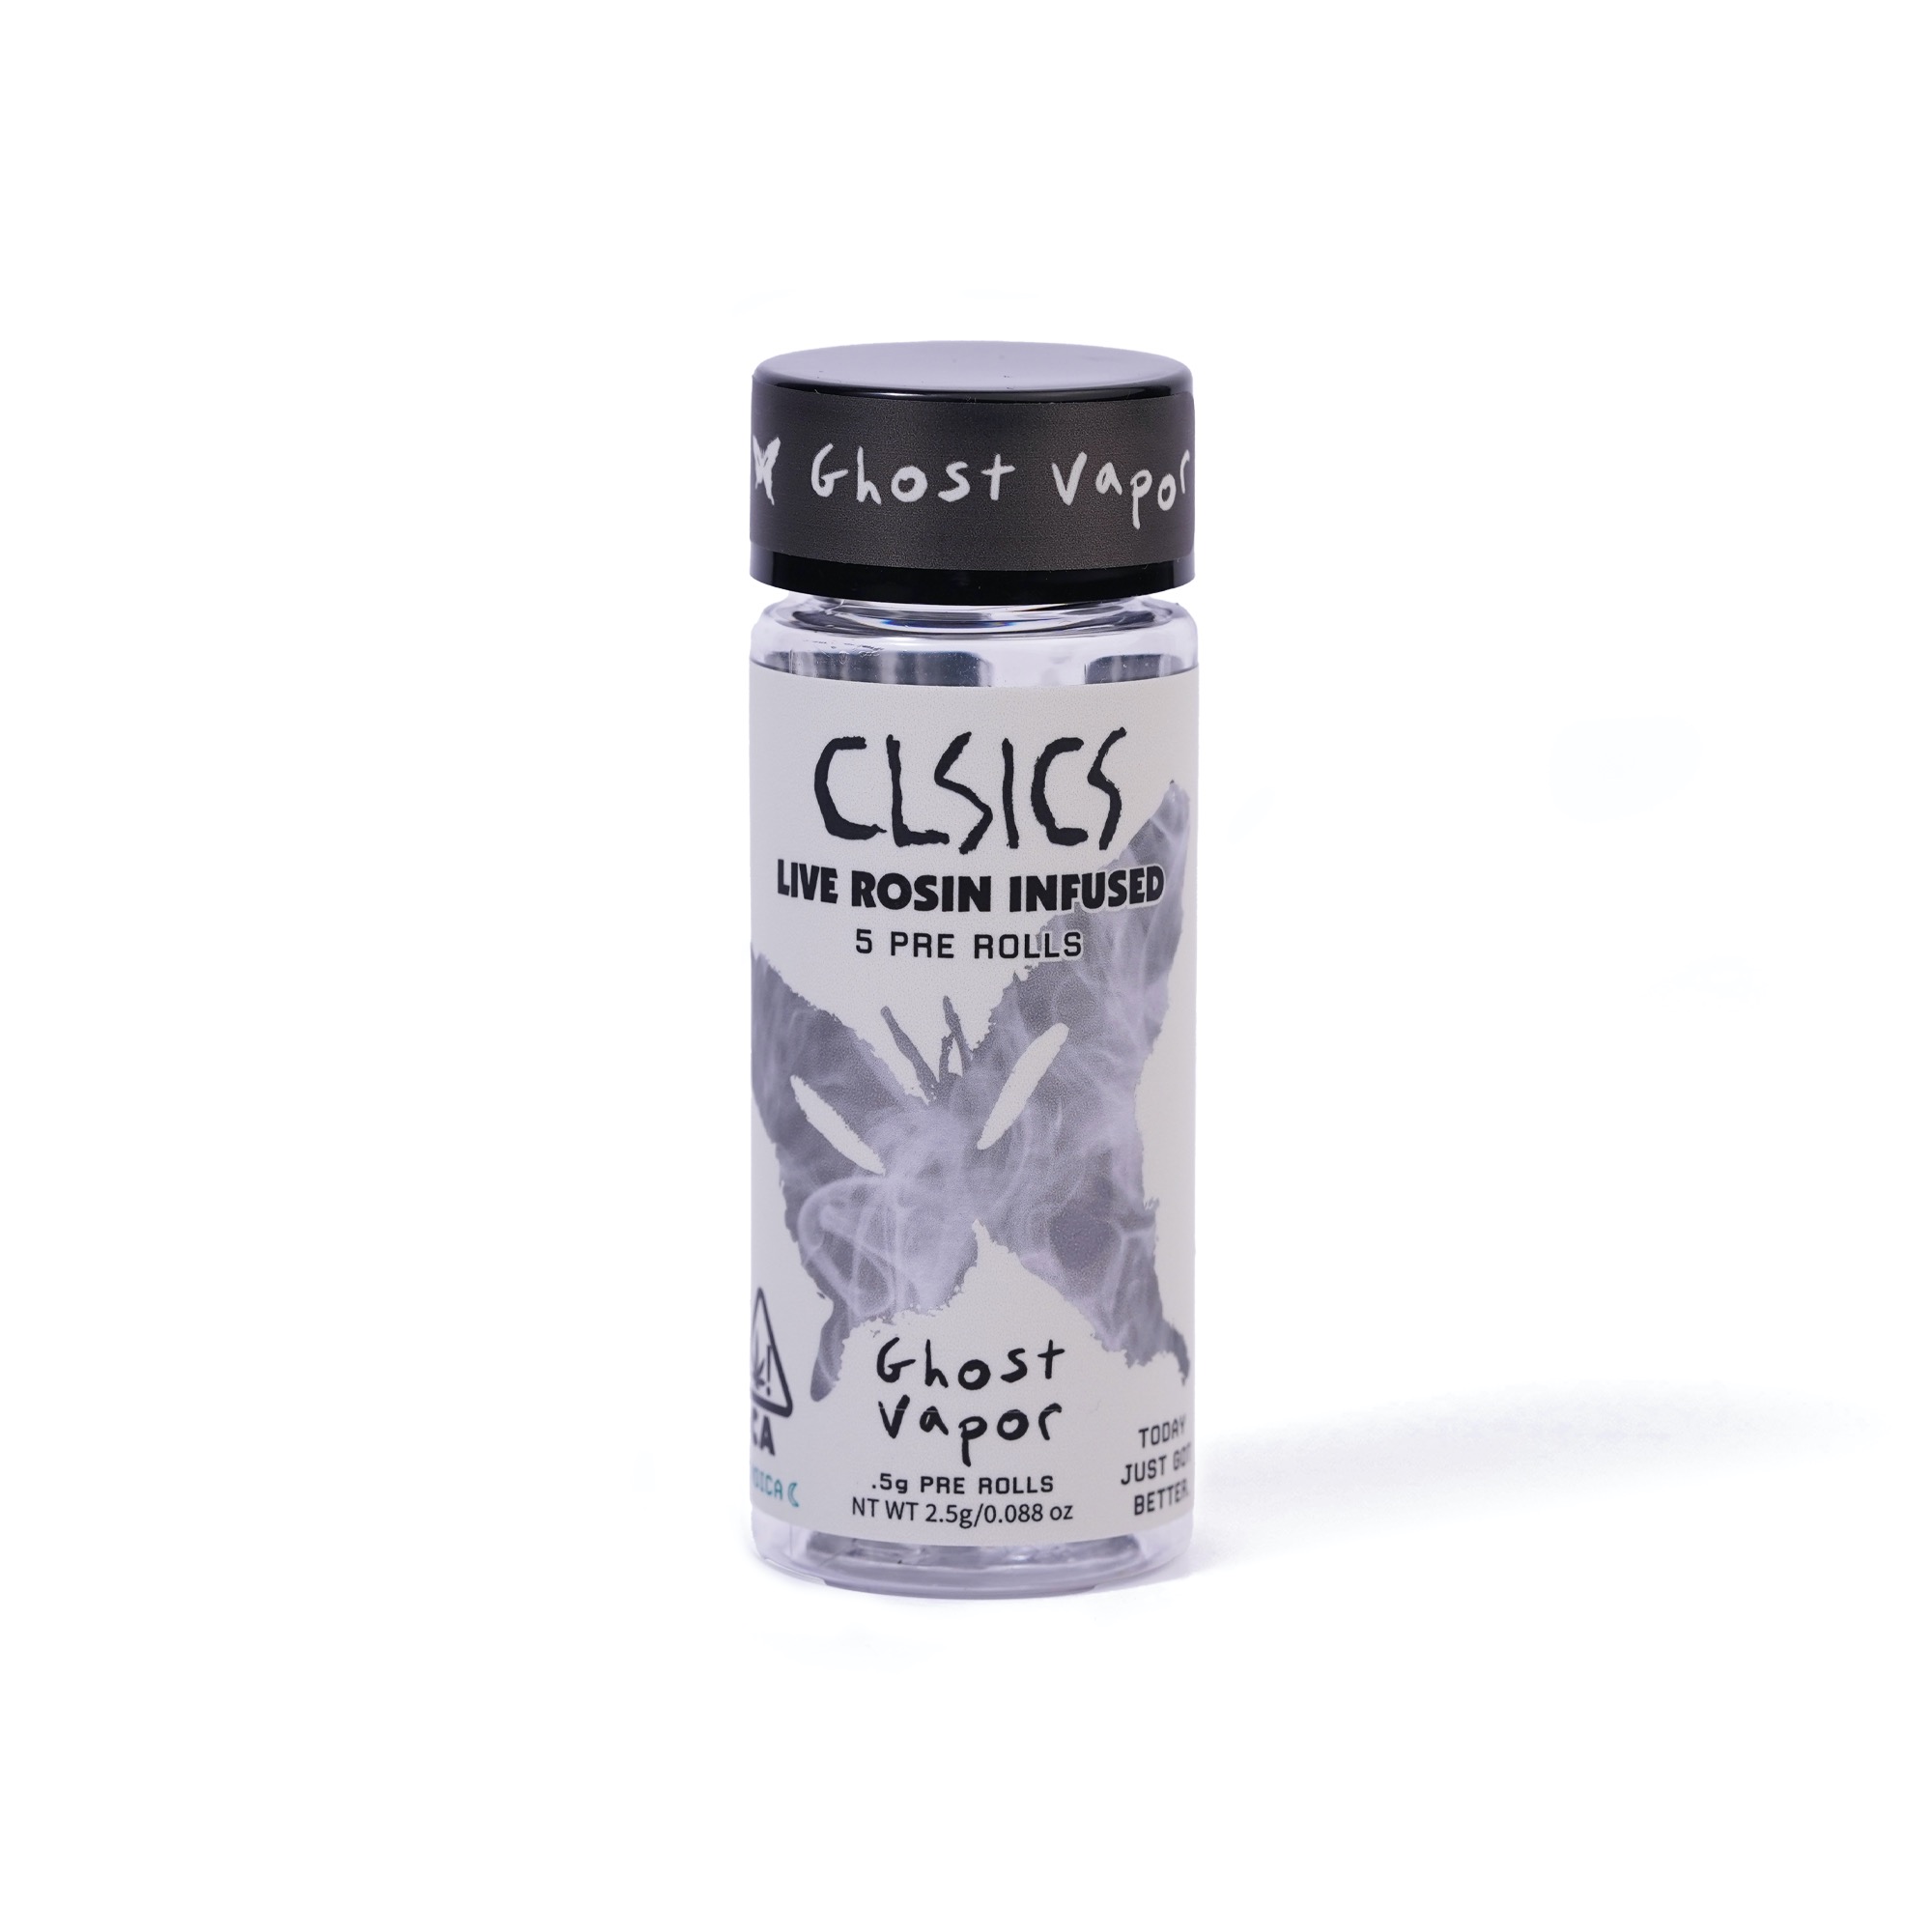 GHOST VAPOR 5 PACK - Airfield Supply Co. Cannabis Dispens